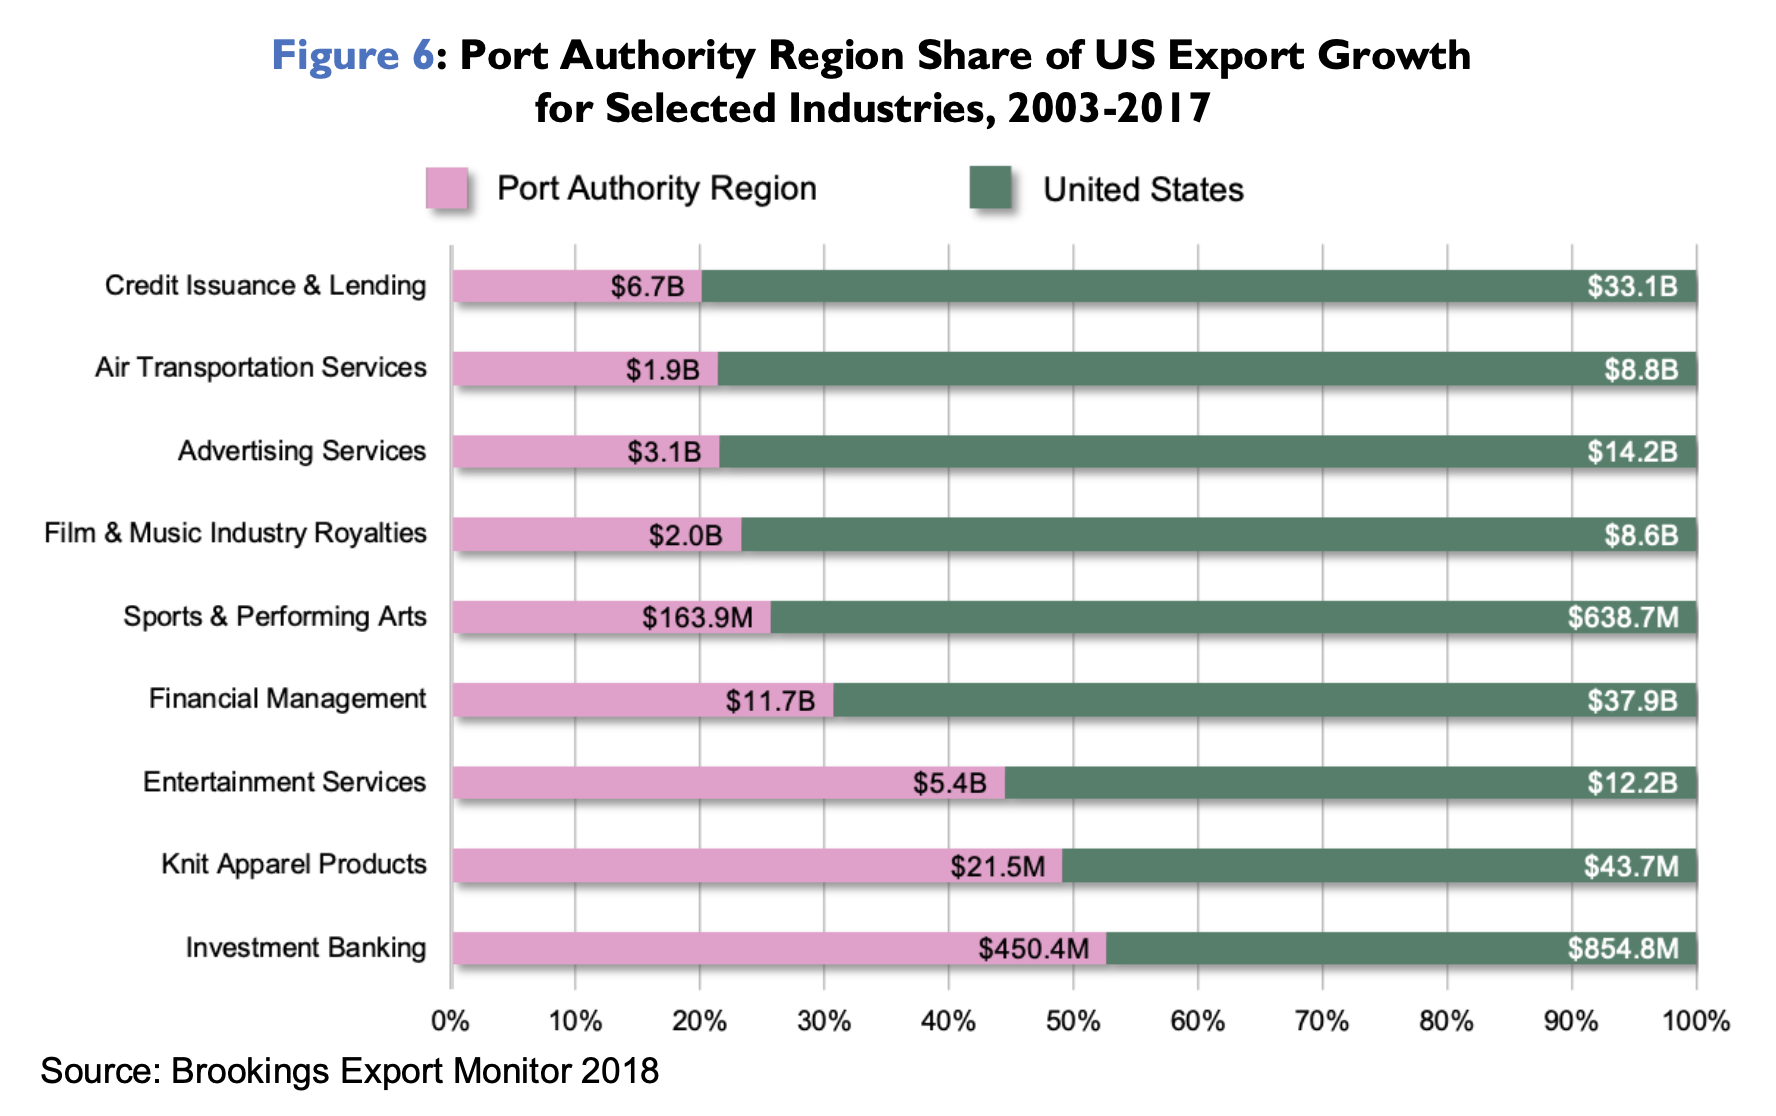 Port Authority Region Share of US Export Growth for Selected Industries, 2003-2017